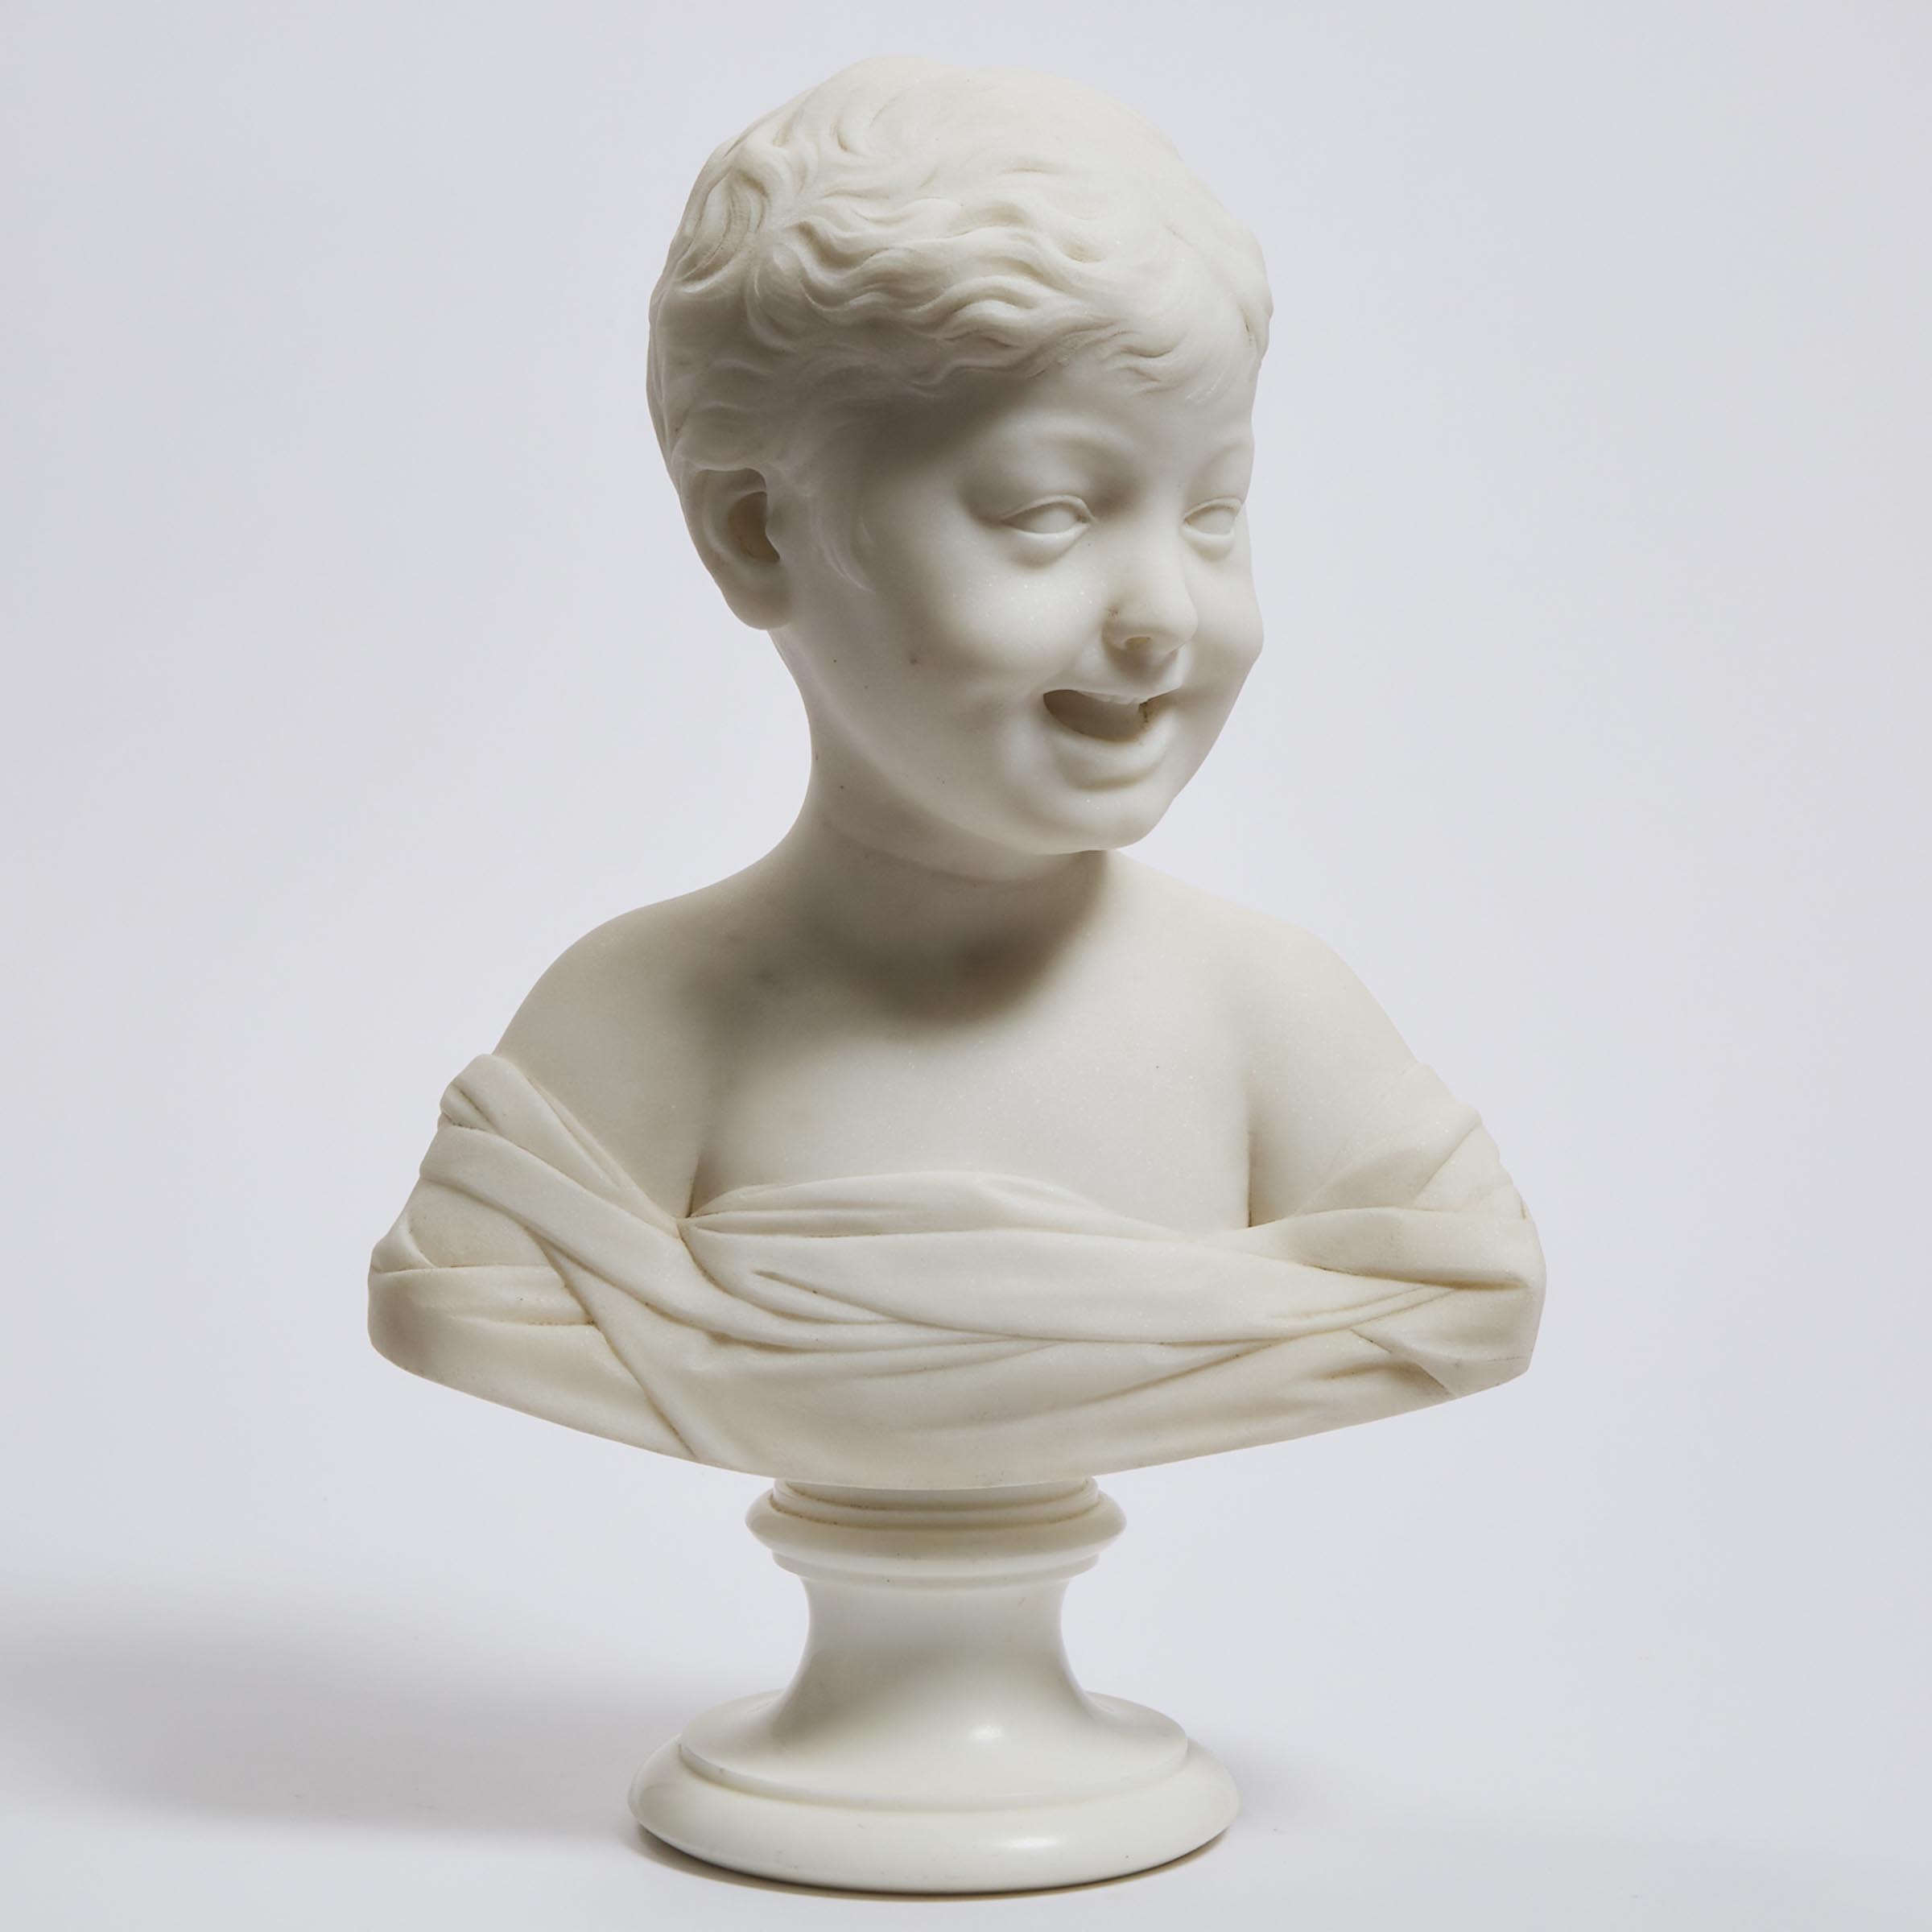 Italian School Marble Bust of a Young Boy, early-mid 20th century